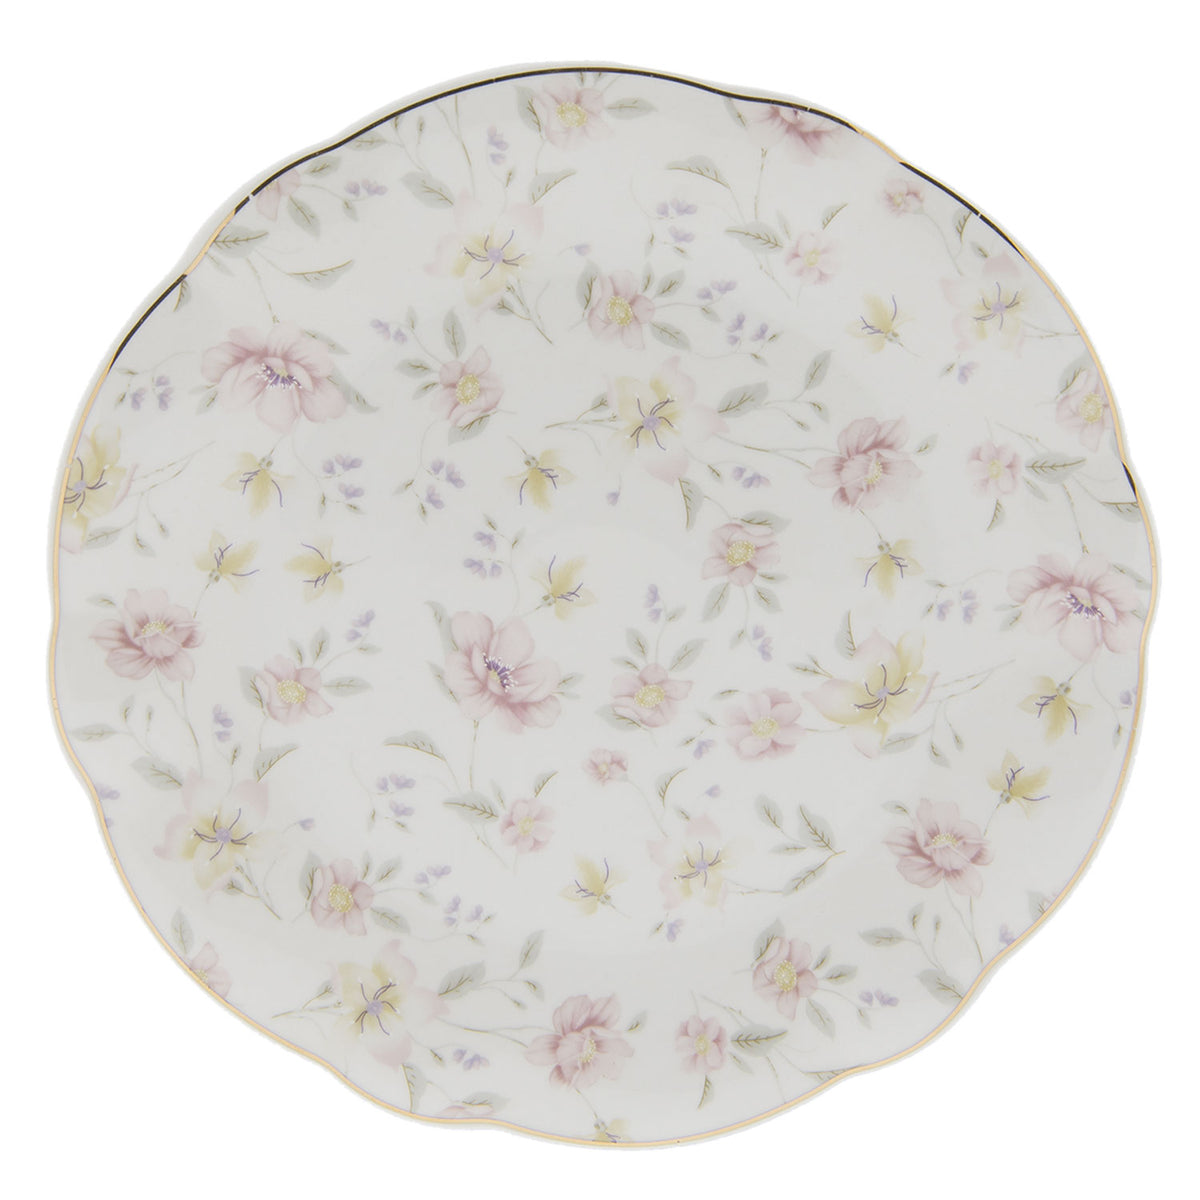 Large plate with floral motif and gold edge